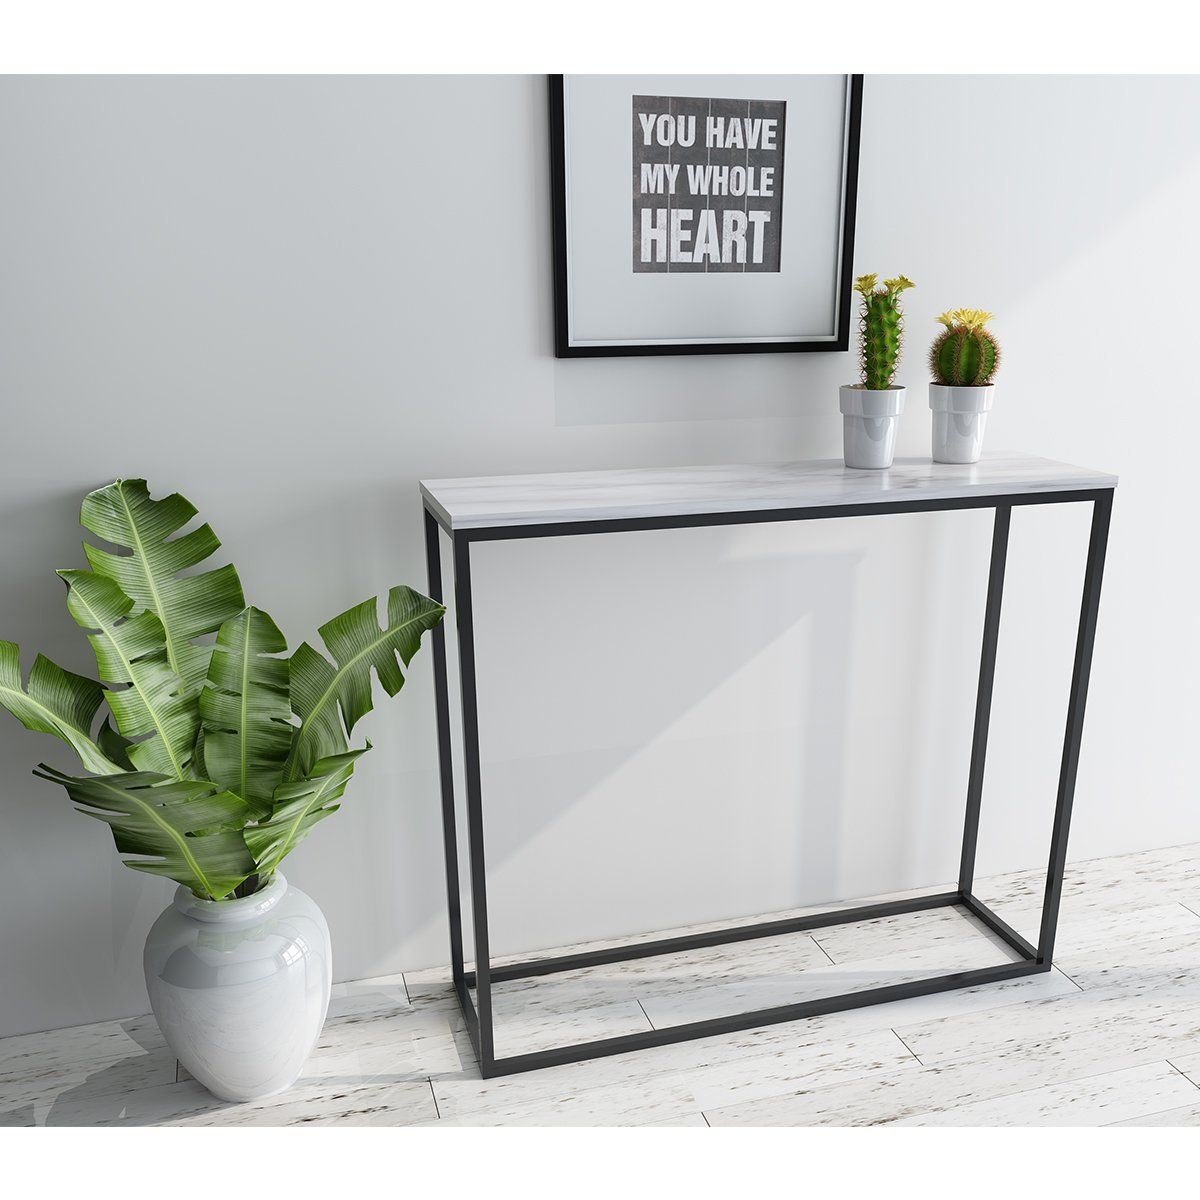 Roomfitters Sofa Console Table Marble Print Top Steel Frame Accent Inside White Marble Gold Metal Console Tables (View 5 of 20)